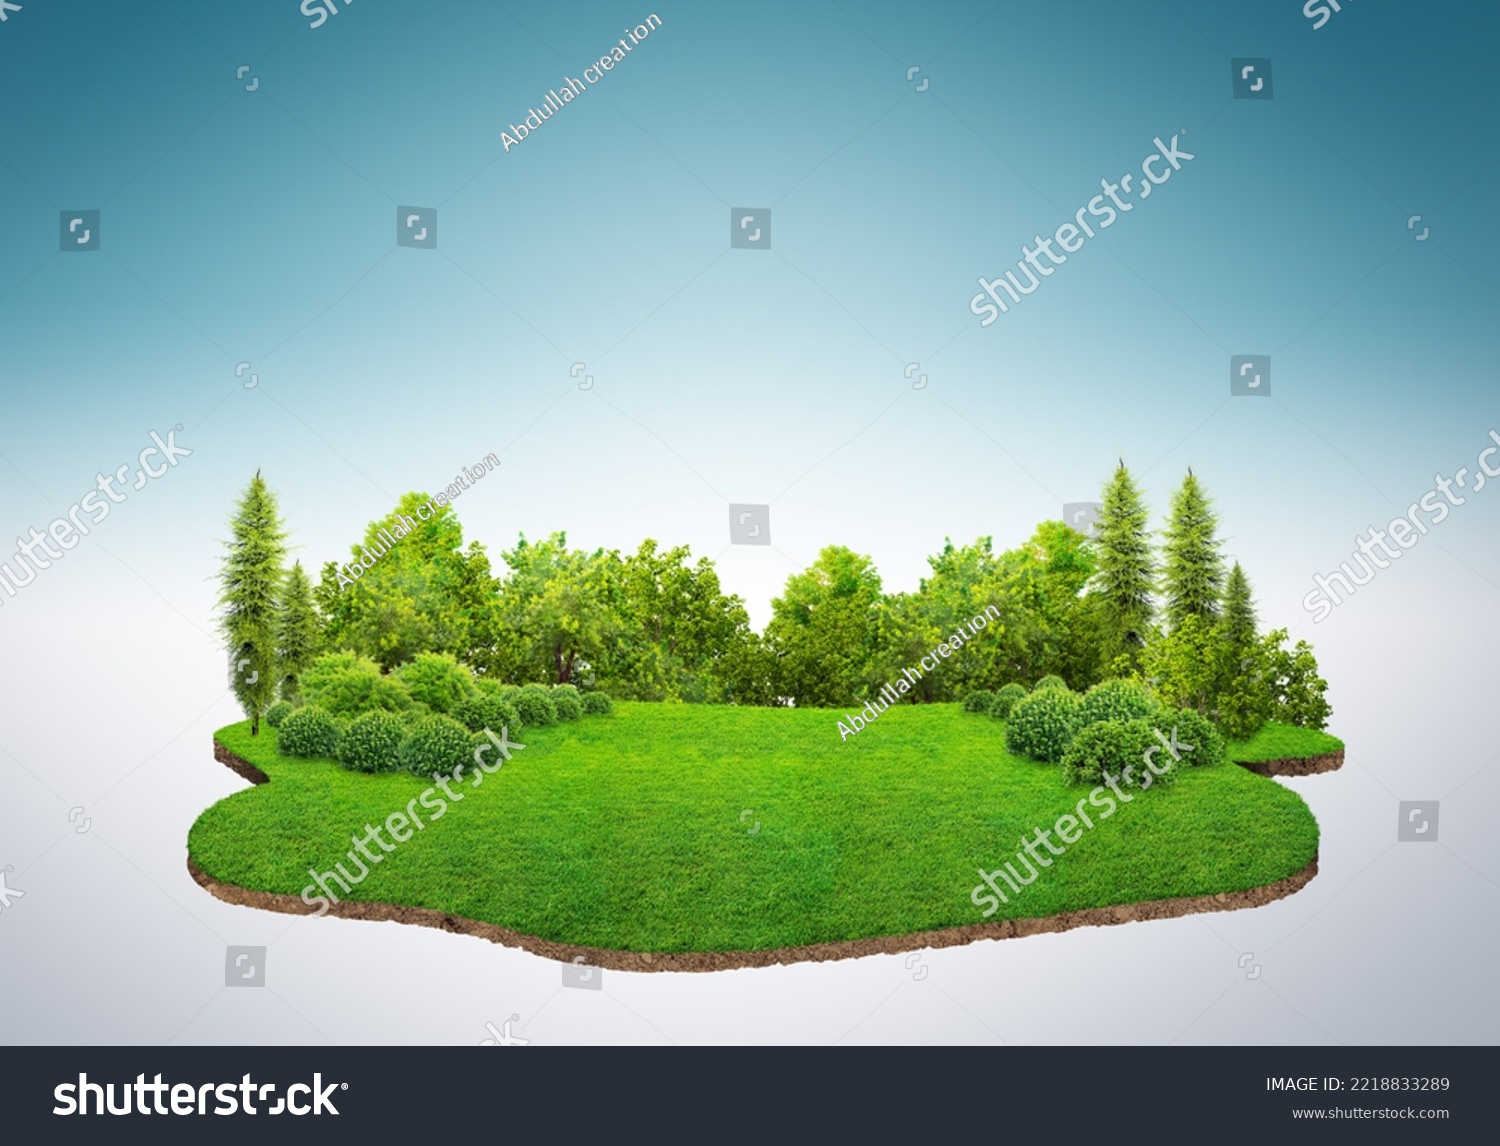 Travel and vacation background. 3d illustration with cut of the ground and the grass landscape. The trees on the island. eco design concept. #2218833289